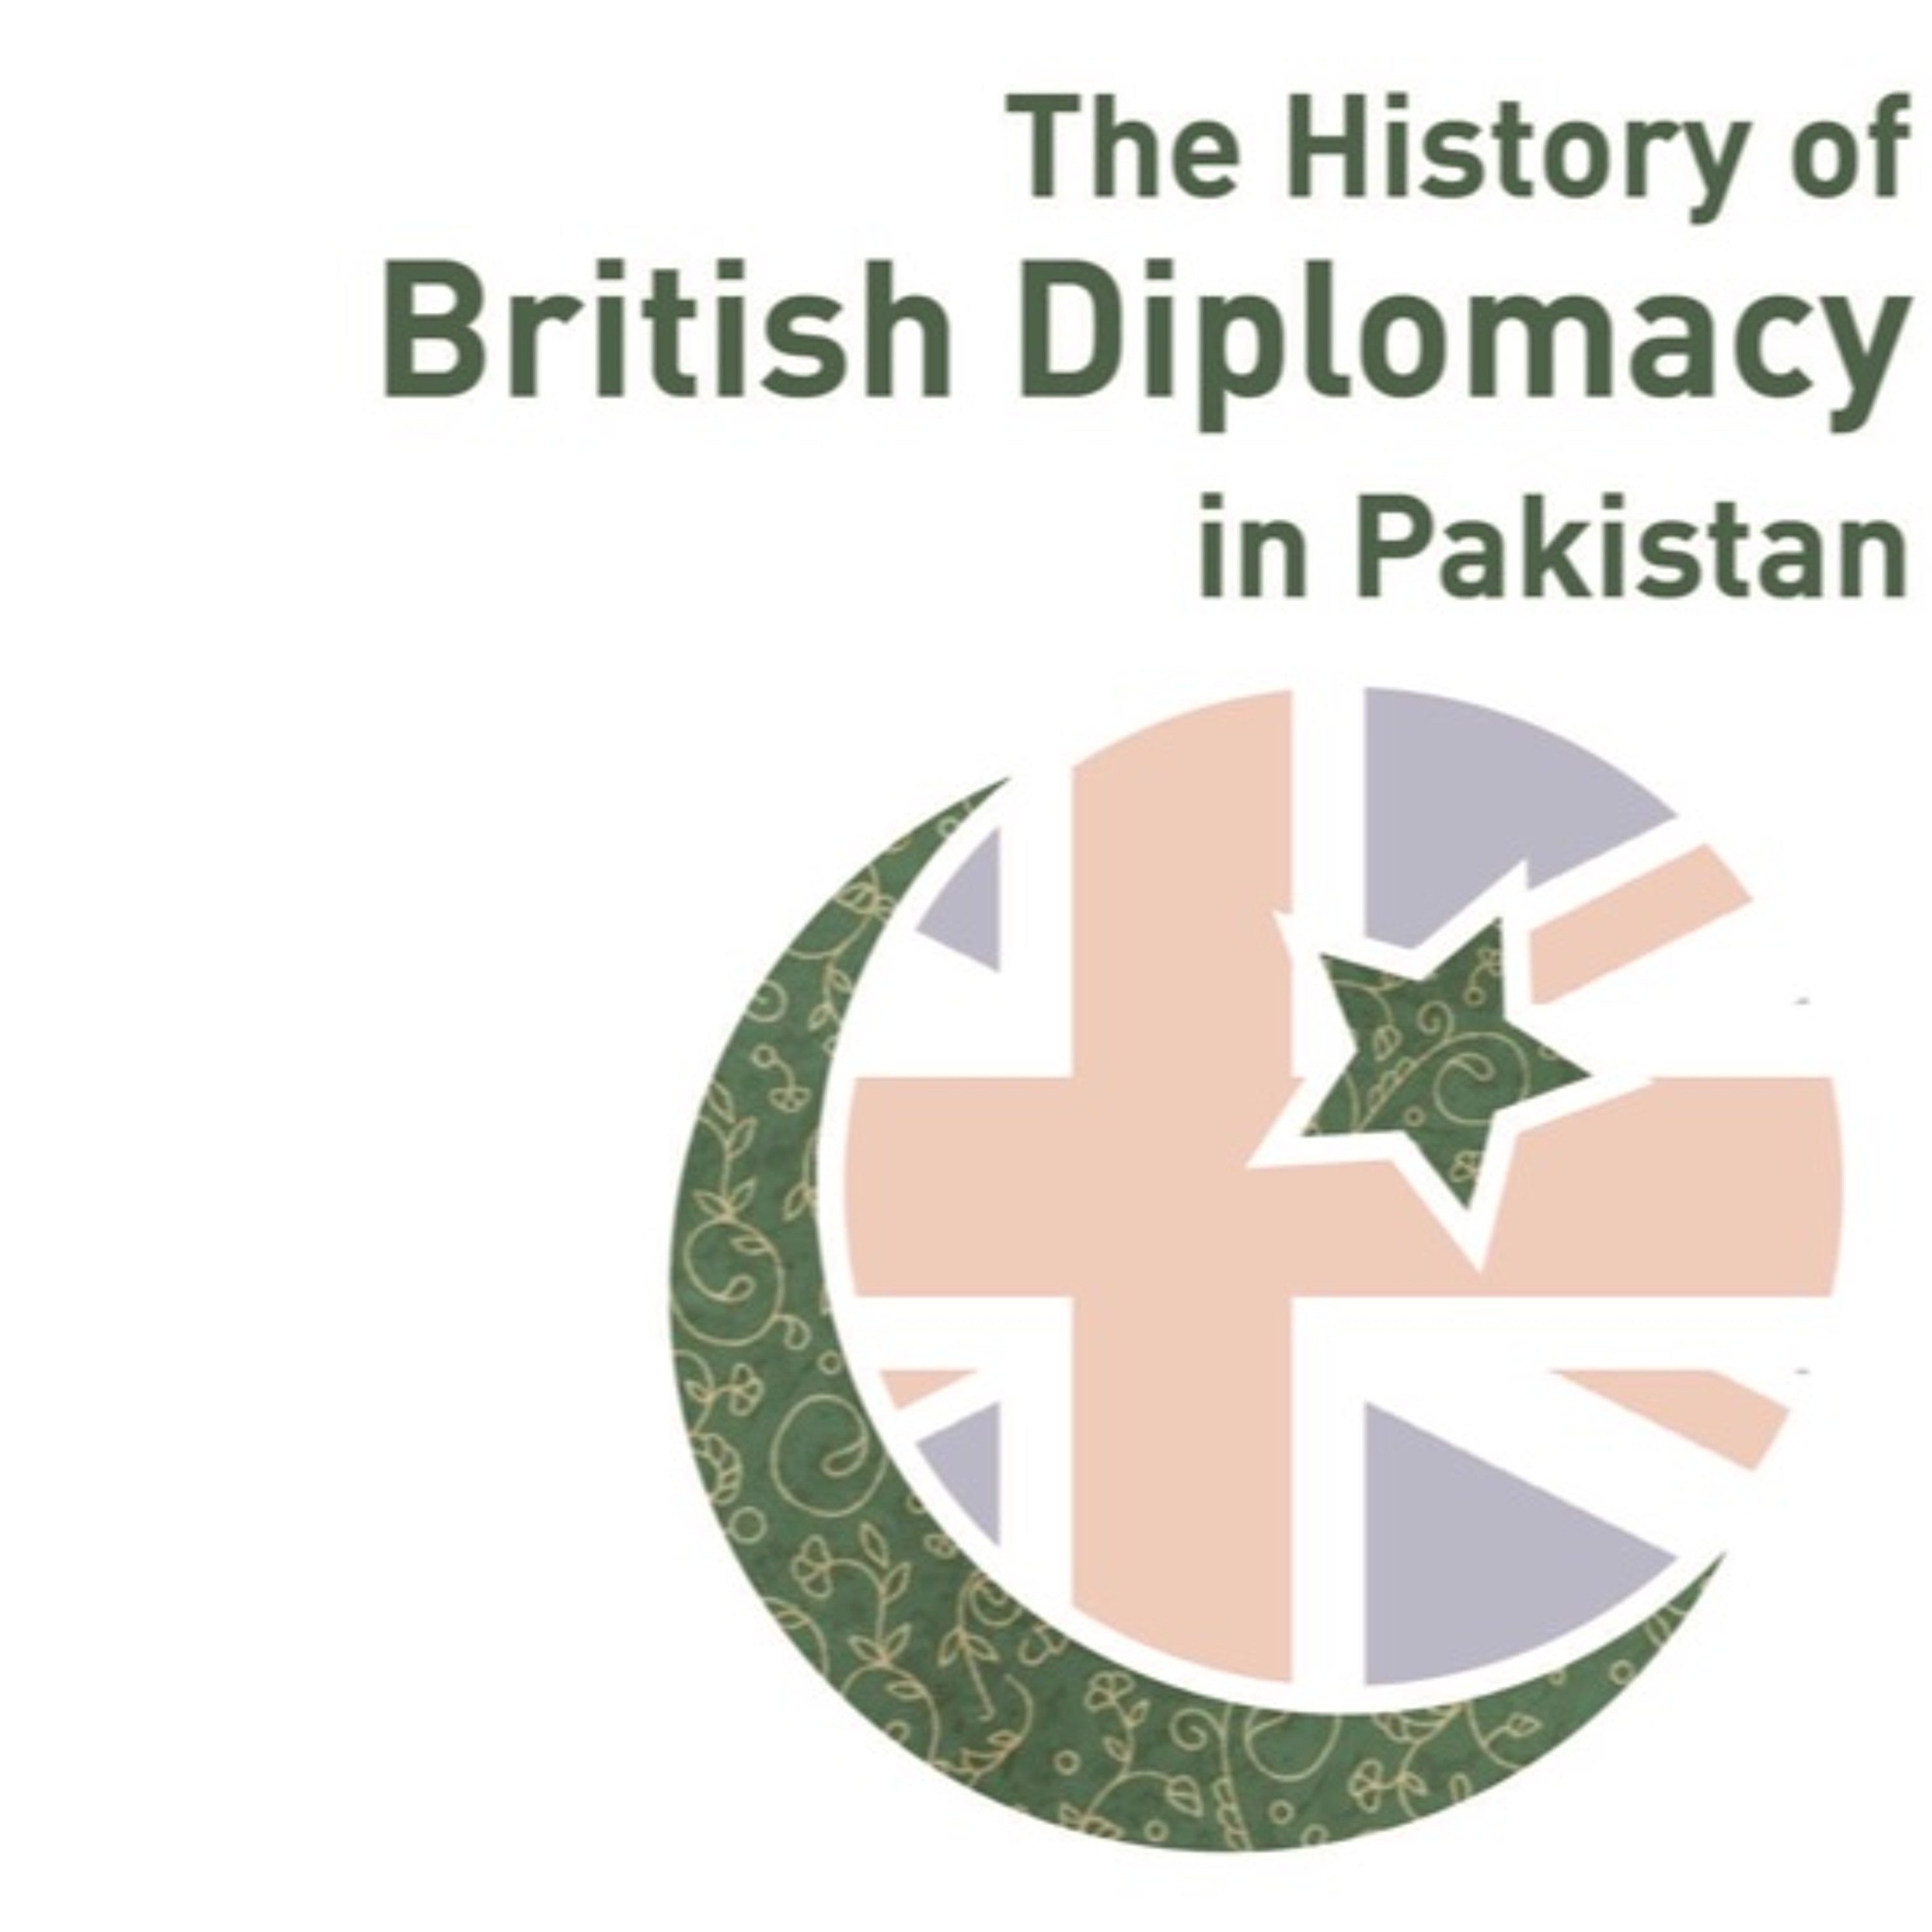 The History of British Diplomacy in Pakistan, with Ian Talbot